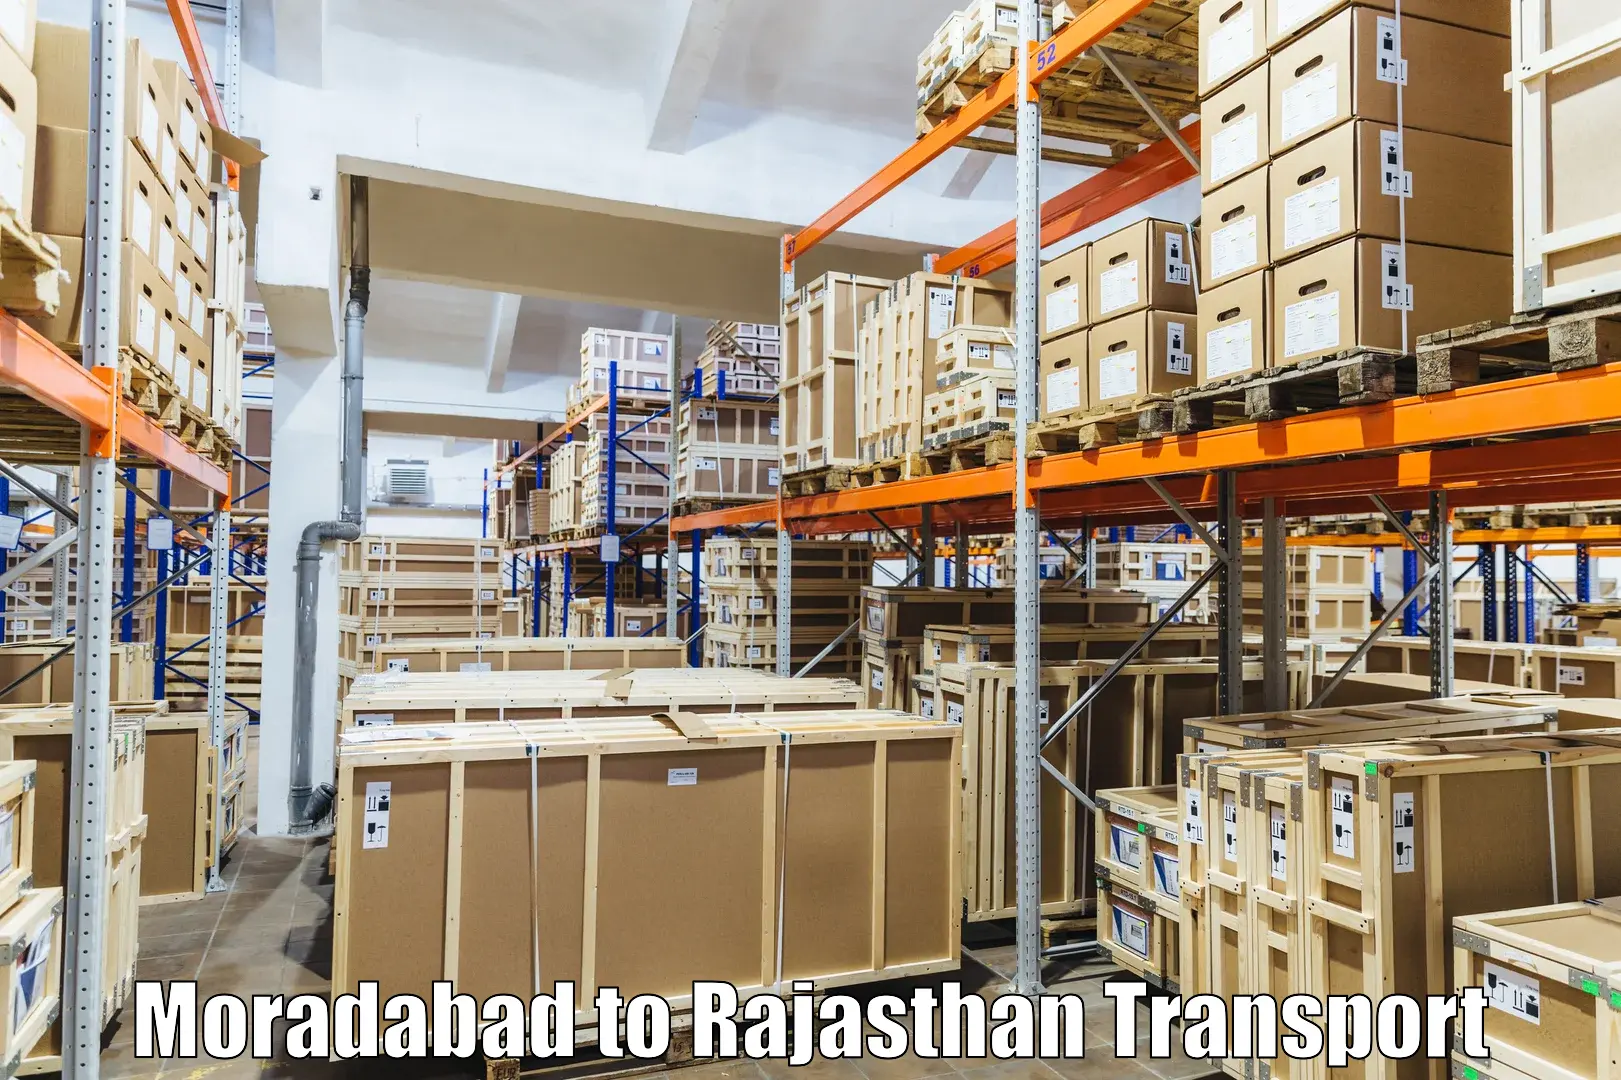 Daily parcel service transport Moradabad to Piparcity